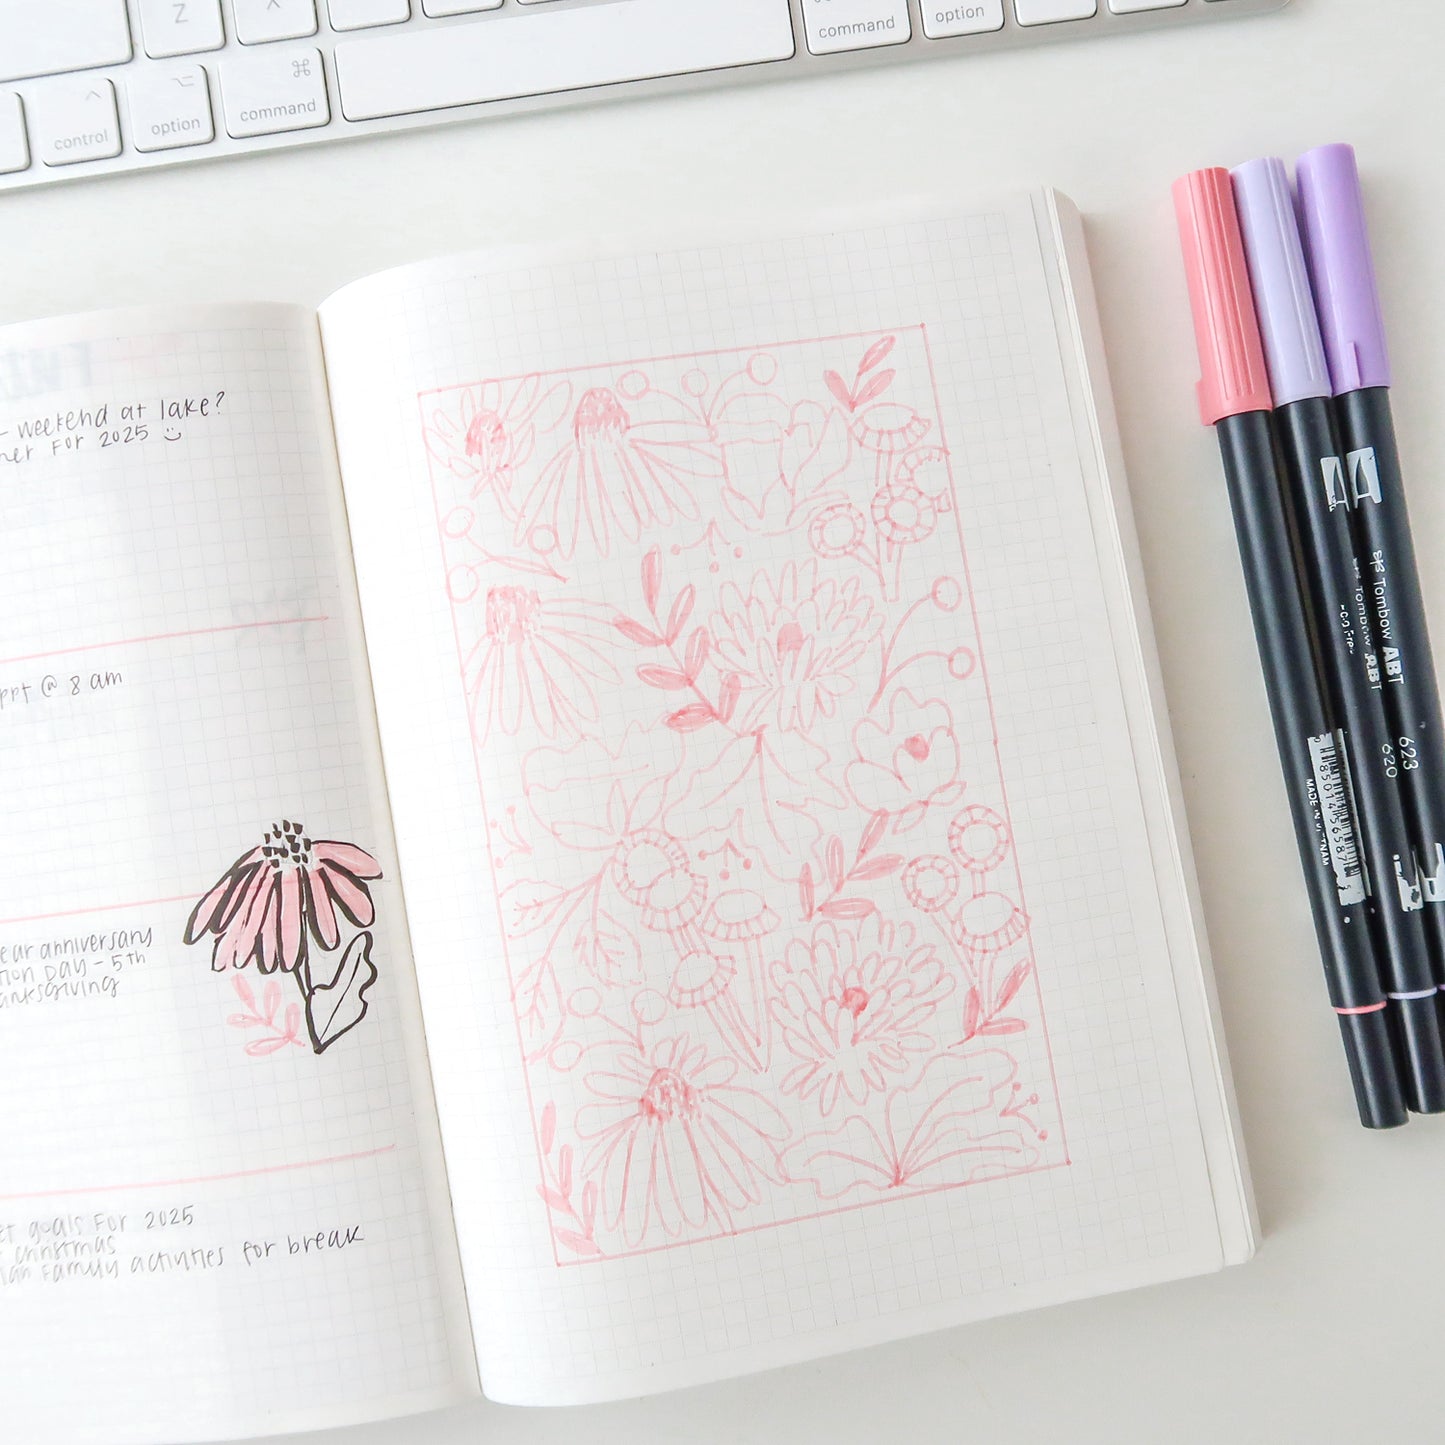 Start With These Essential Pages for Your Bullet Journal Setup